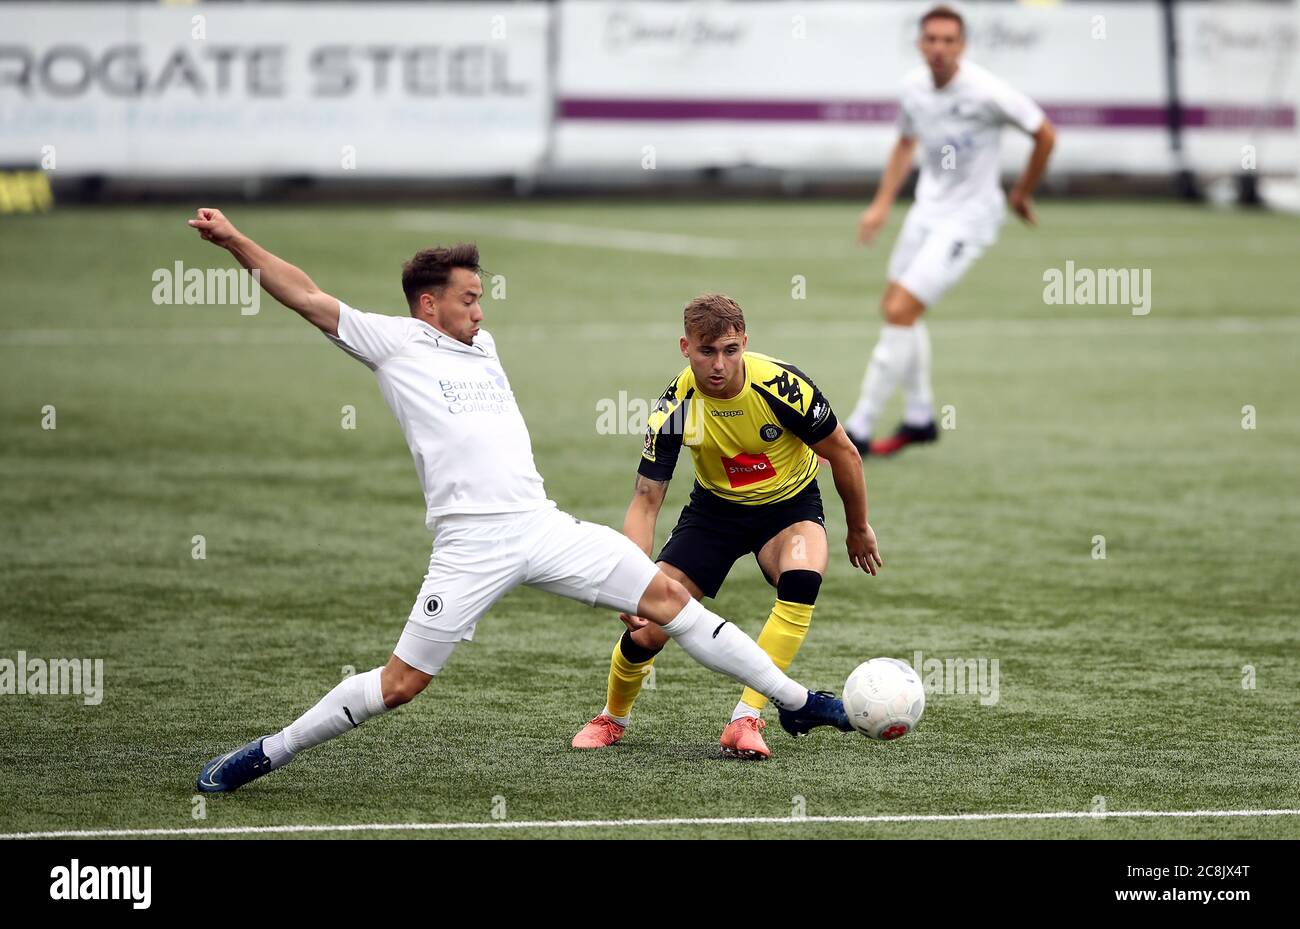 Harrogate Town’s Jack Diamond (right) and Boreham Wood’s Kane Smith battle for the ball during the Vanarama National League play-off semi final match at CNG Stadium, Harrogate. Stock Photo